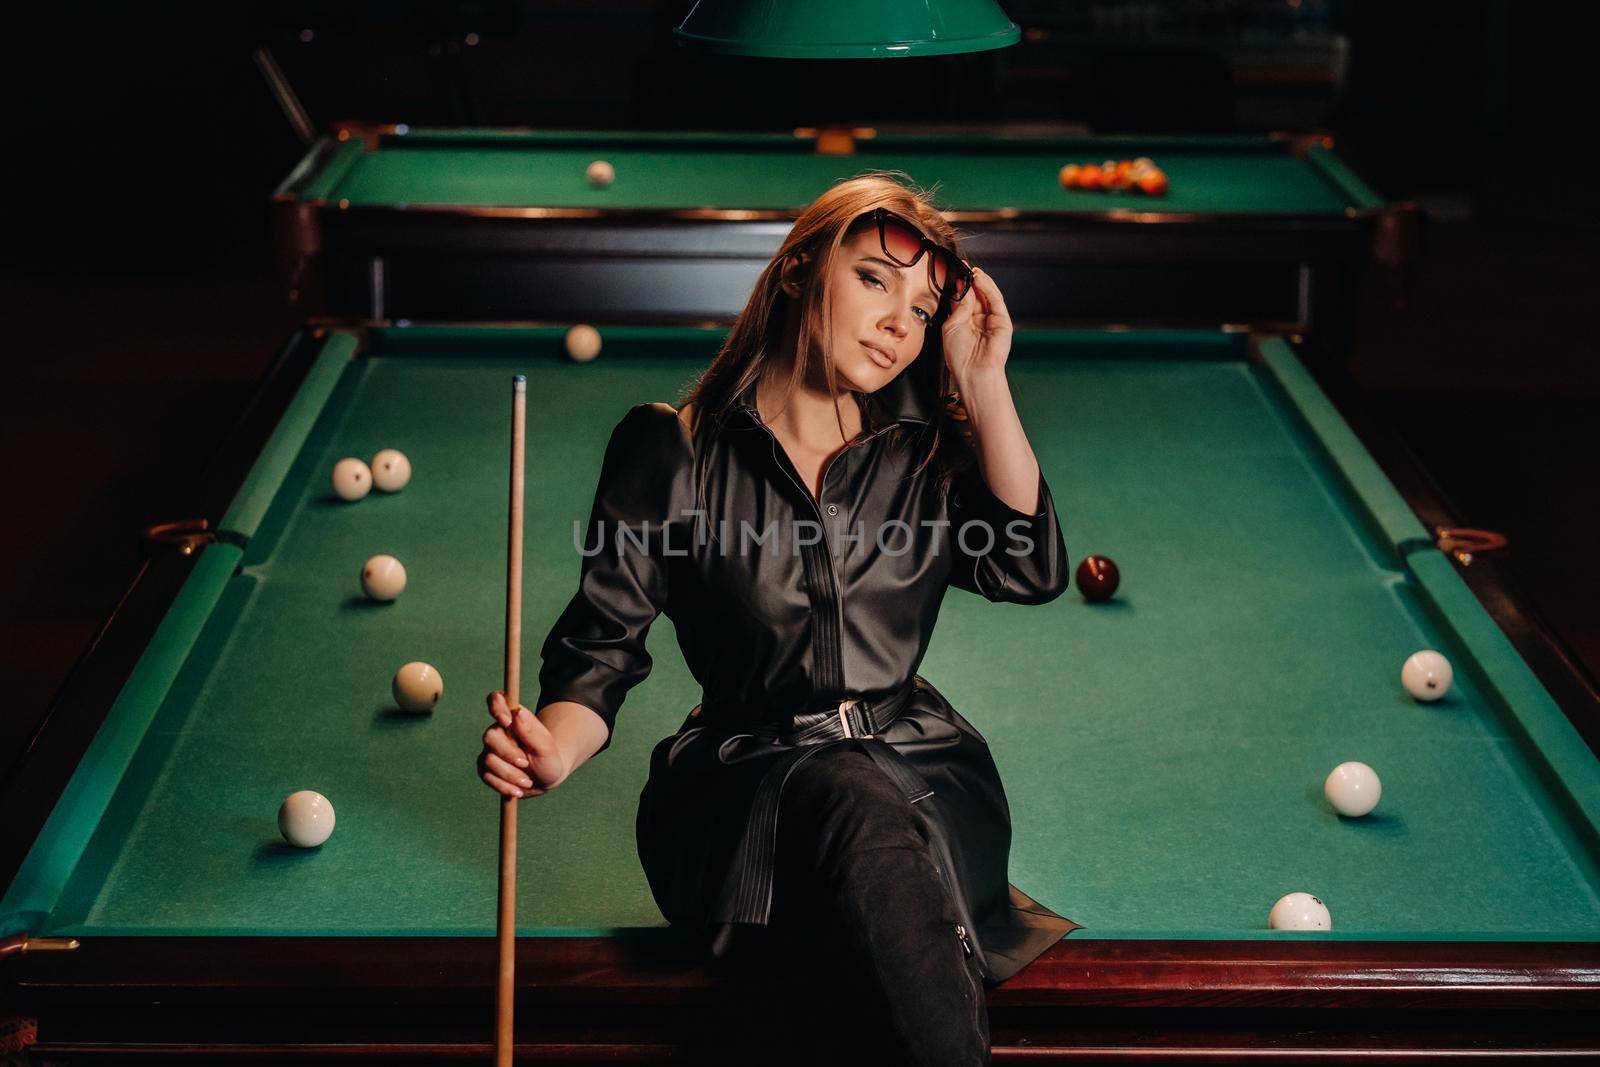 A girl with glasses sits on a pool table in a club.Russian billiards.